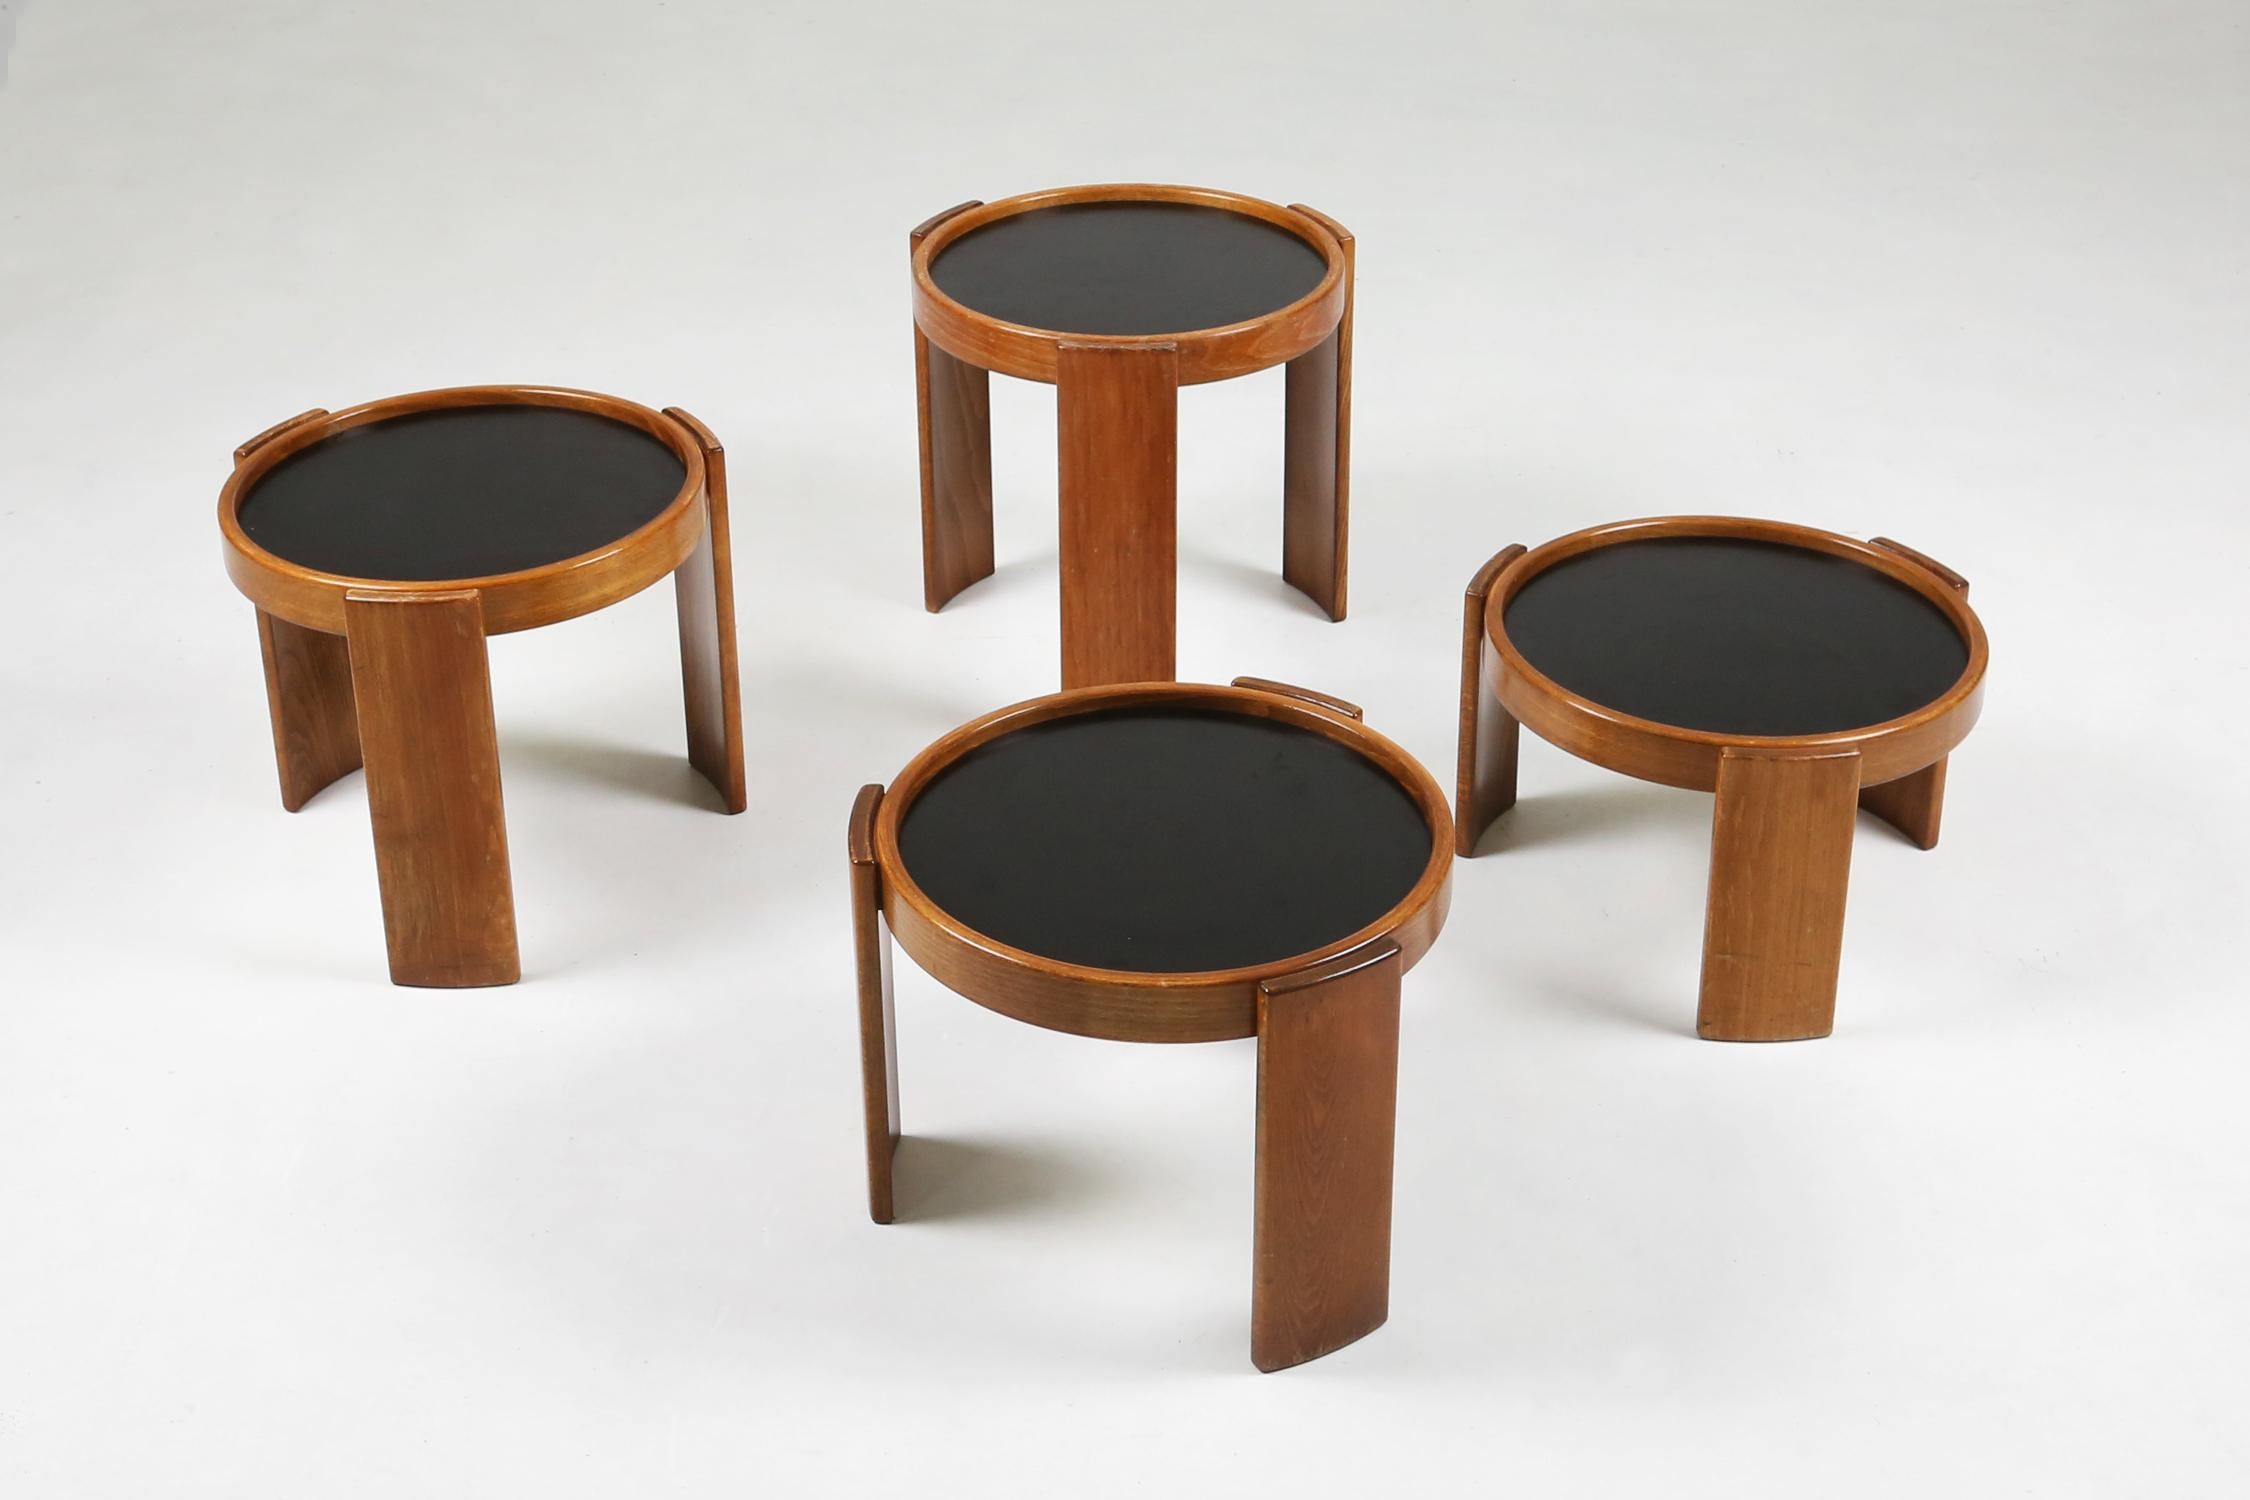 Gianfranco Frattini for Casina, Italy, 1966, early edition wooden nesting tables In Good Condition For Sale In Meulebeke, BE